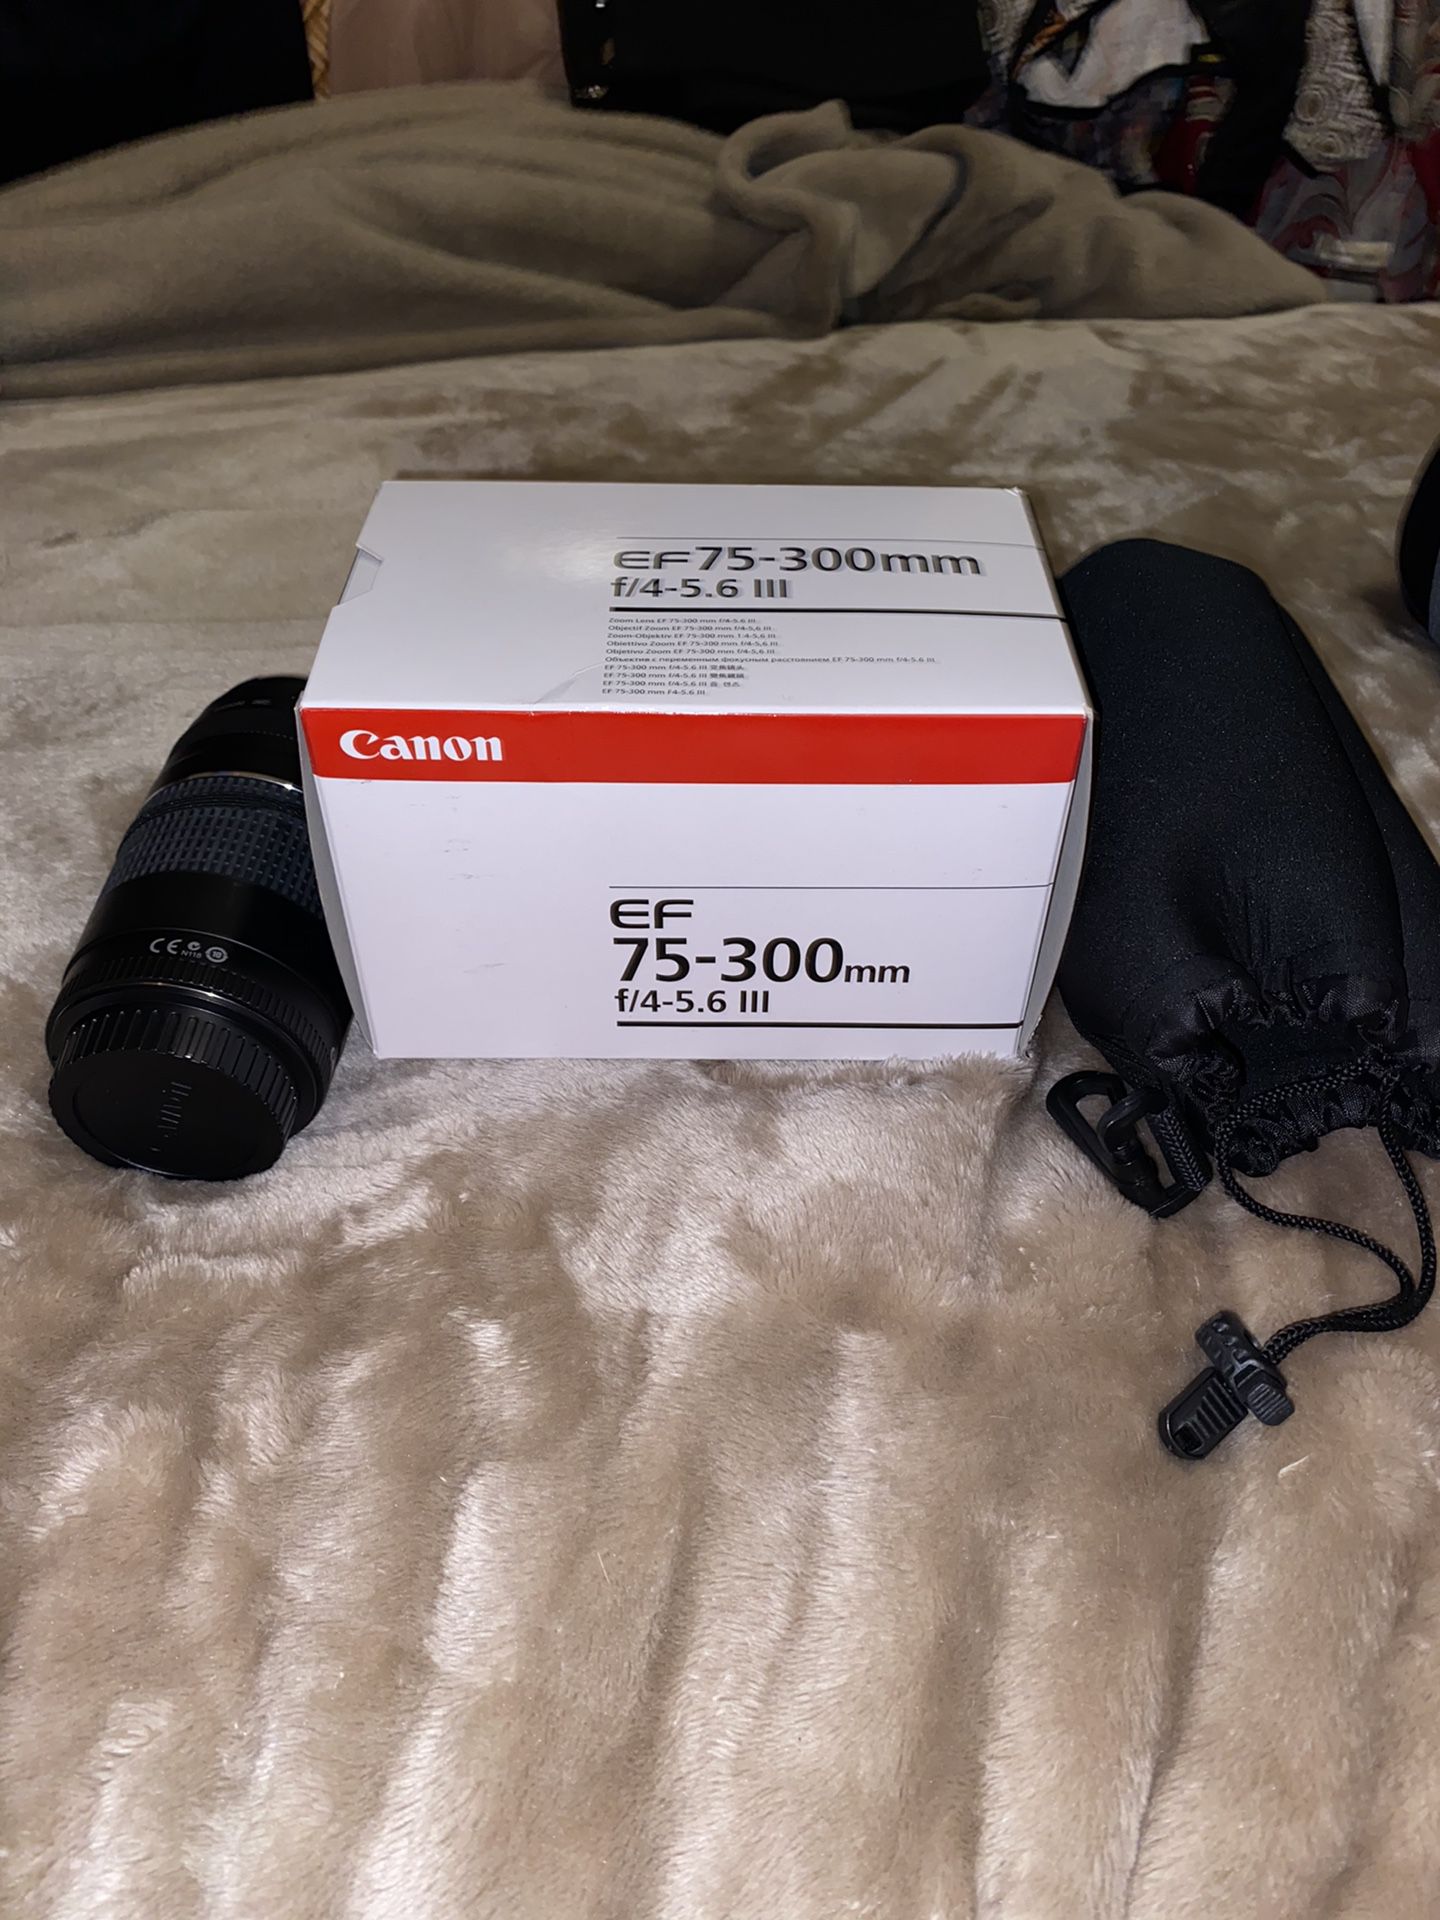 Canon EF 75-300mm f/4-5.6 III Telephoto Zoom Lens for Canon SLR Cameras for  Sale in Plantation, FL - OfferUp